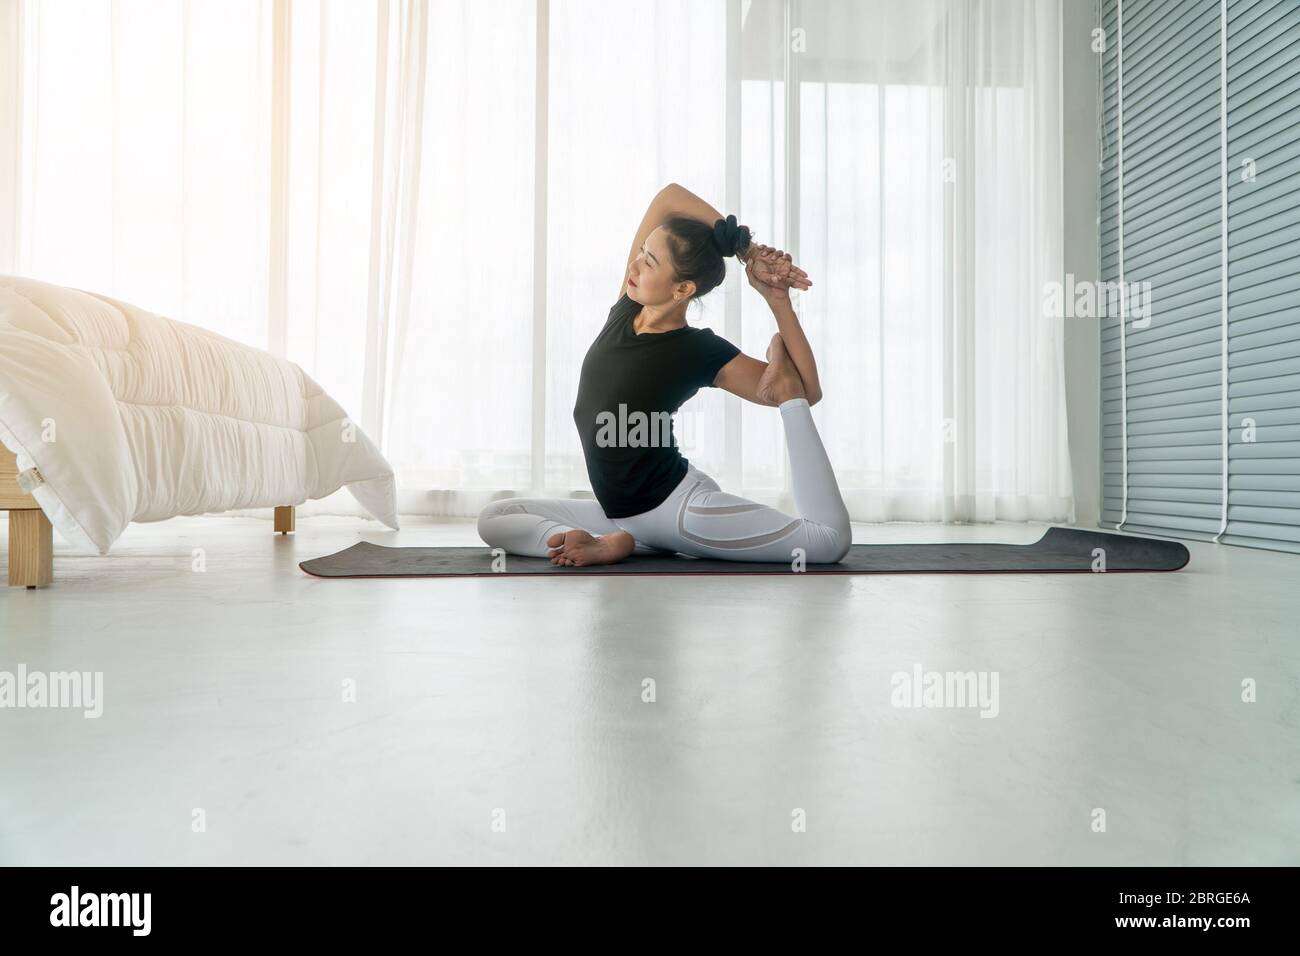 Middle aged women doing yoga in bedroom at the morning, adho mukha svanasana pose. Concept of exercise and relaxation in the morning. Stock Photo